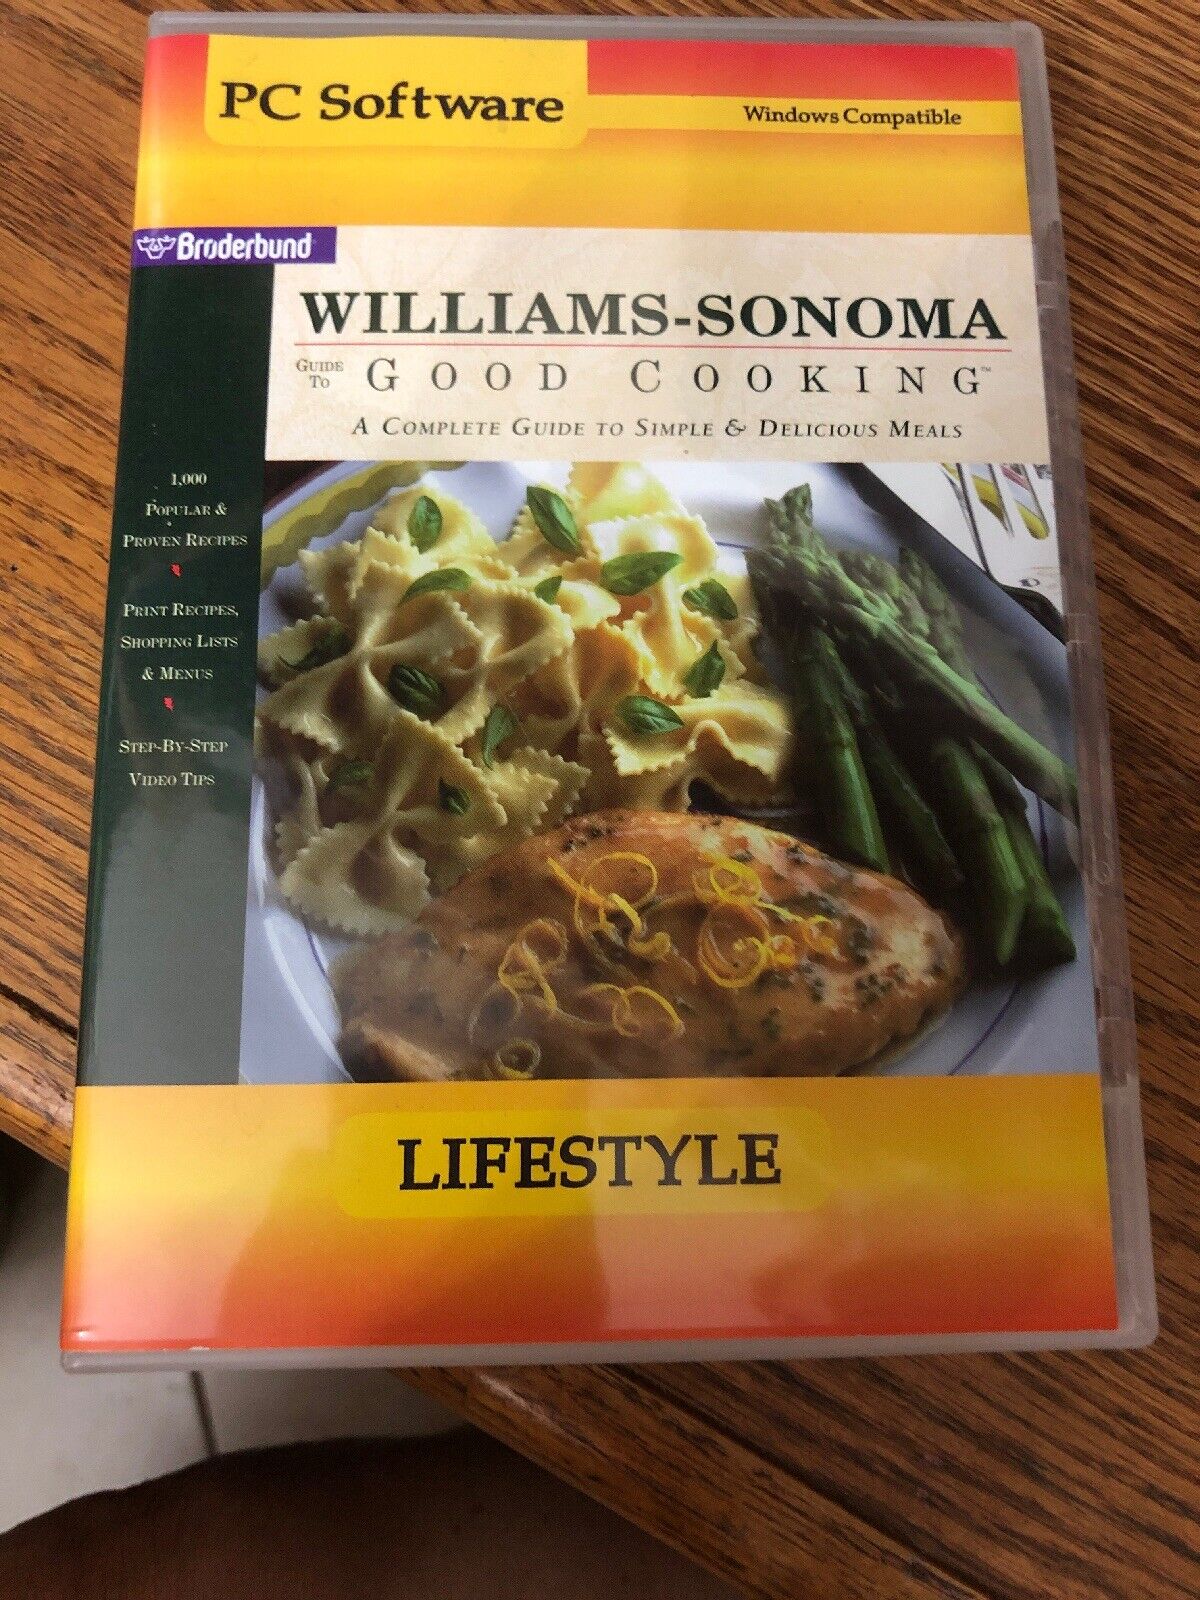 William And Sonoma Guide To Good Cooking  Pc Software